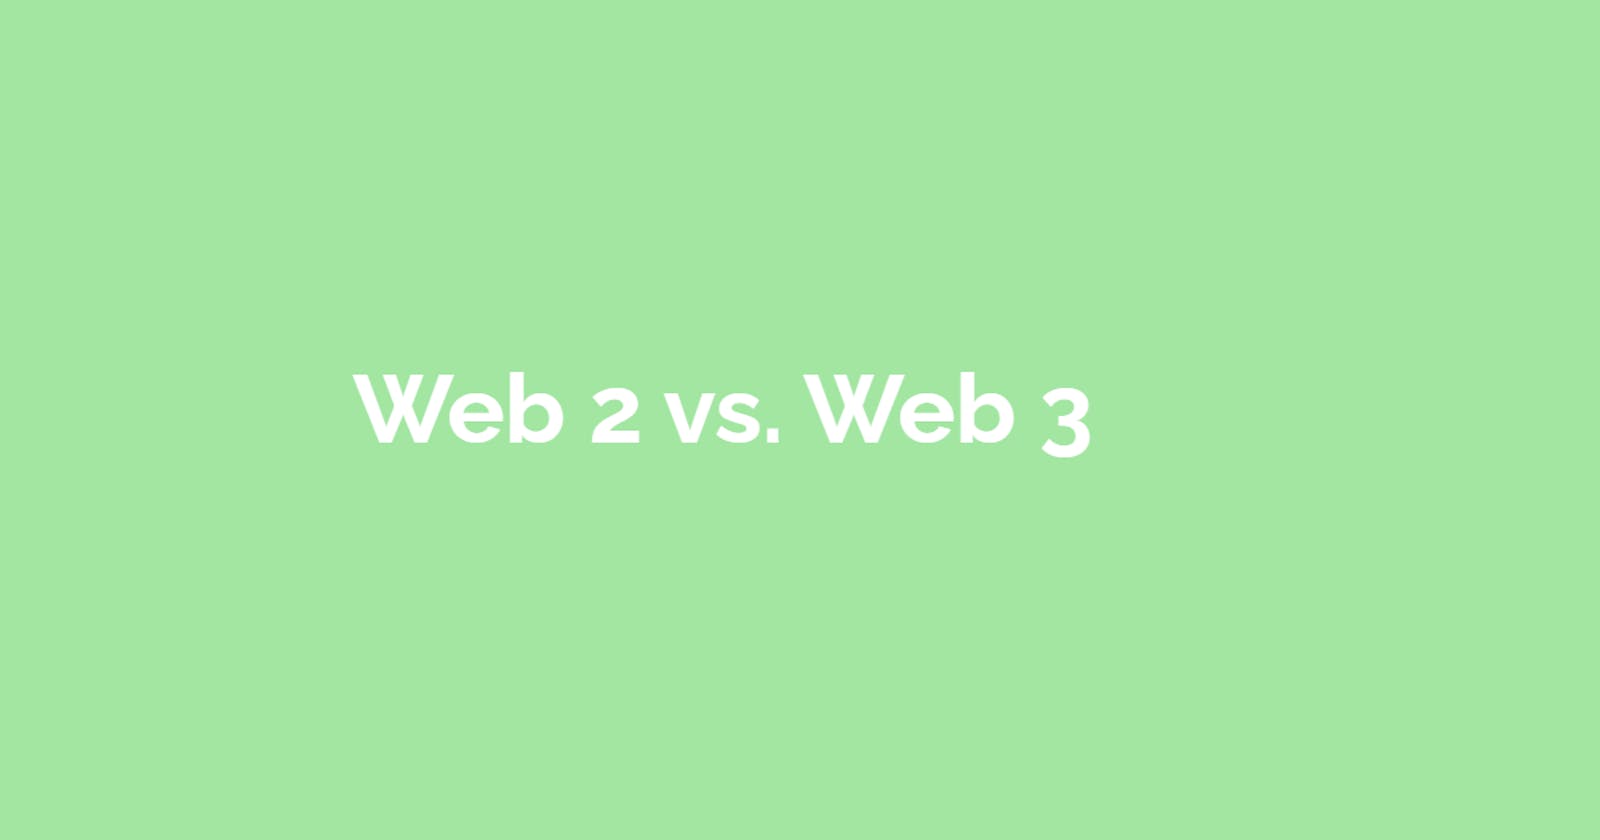 Web 2 vs. Web 3: The difference